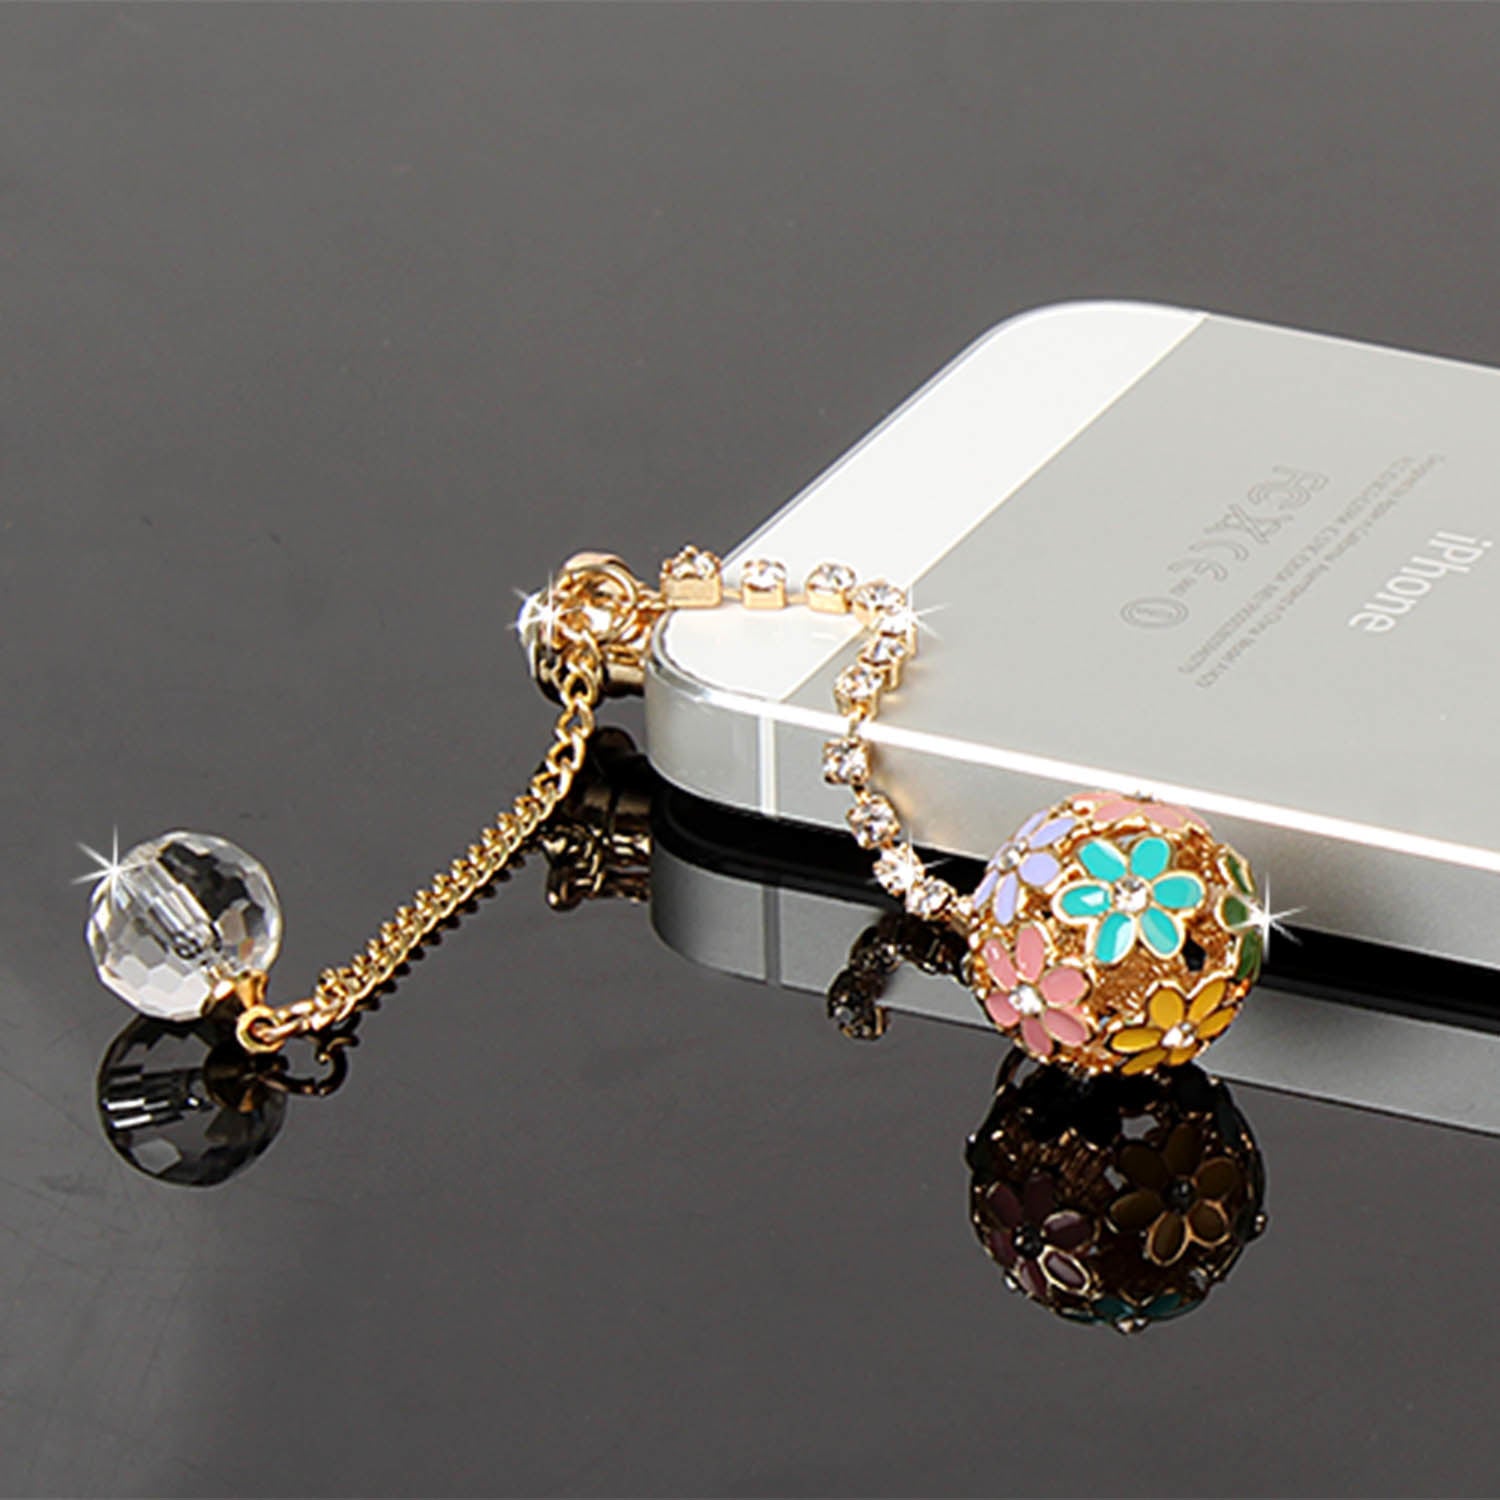 Anti-Dust Plug Colorful Pendant For Cell Phone